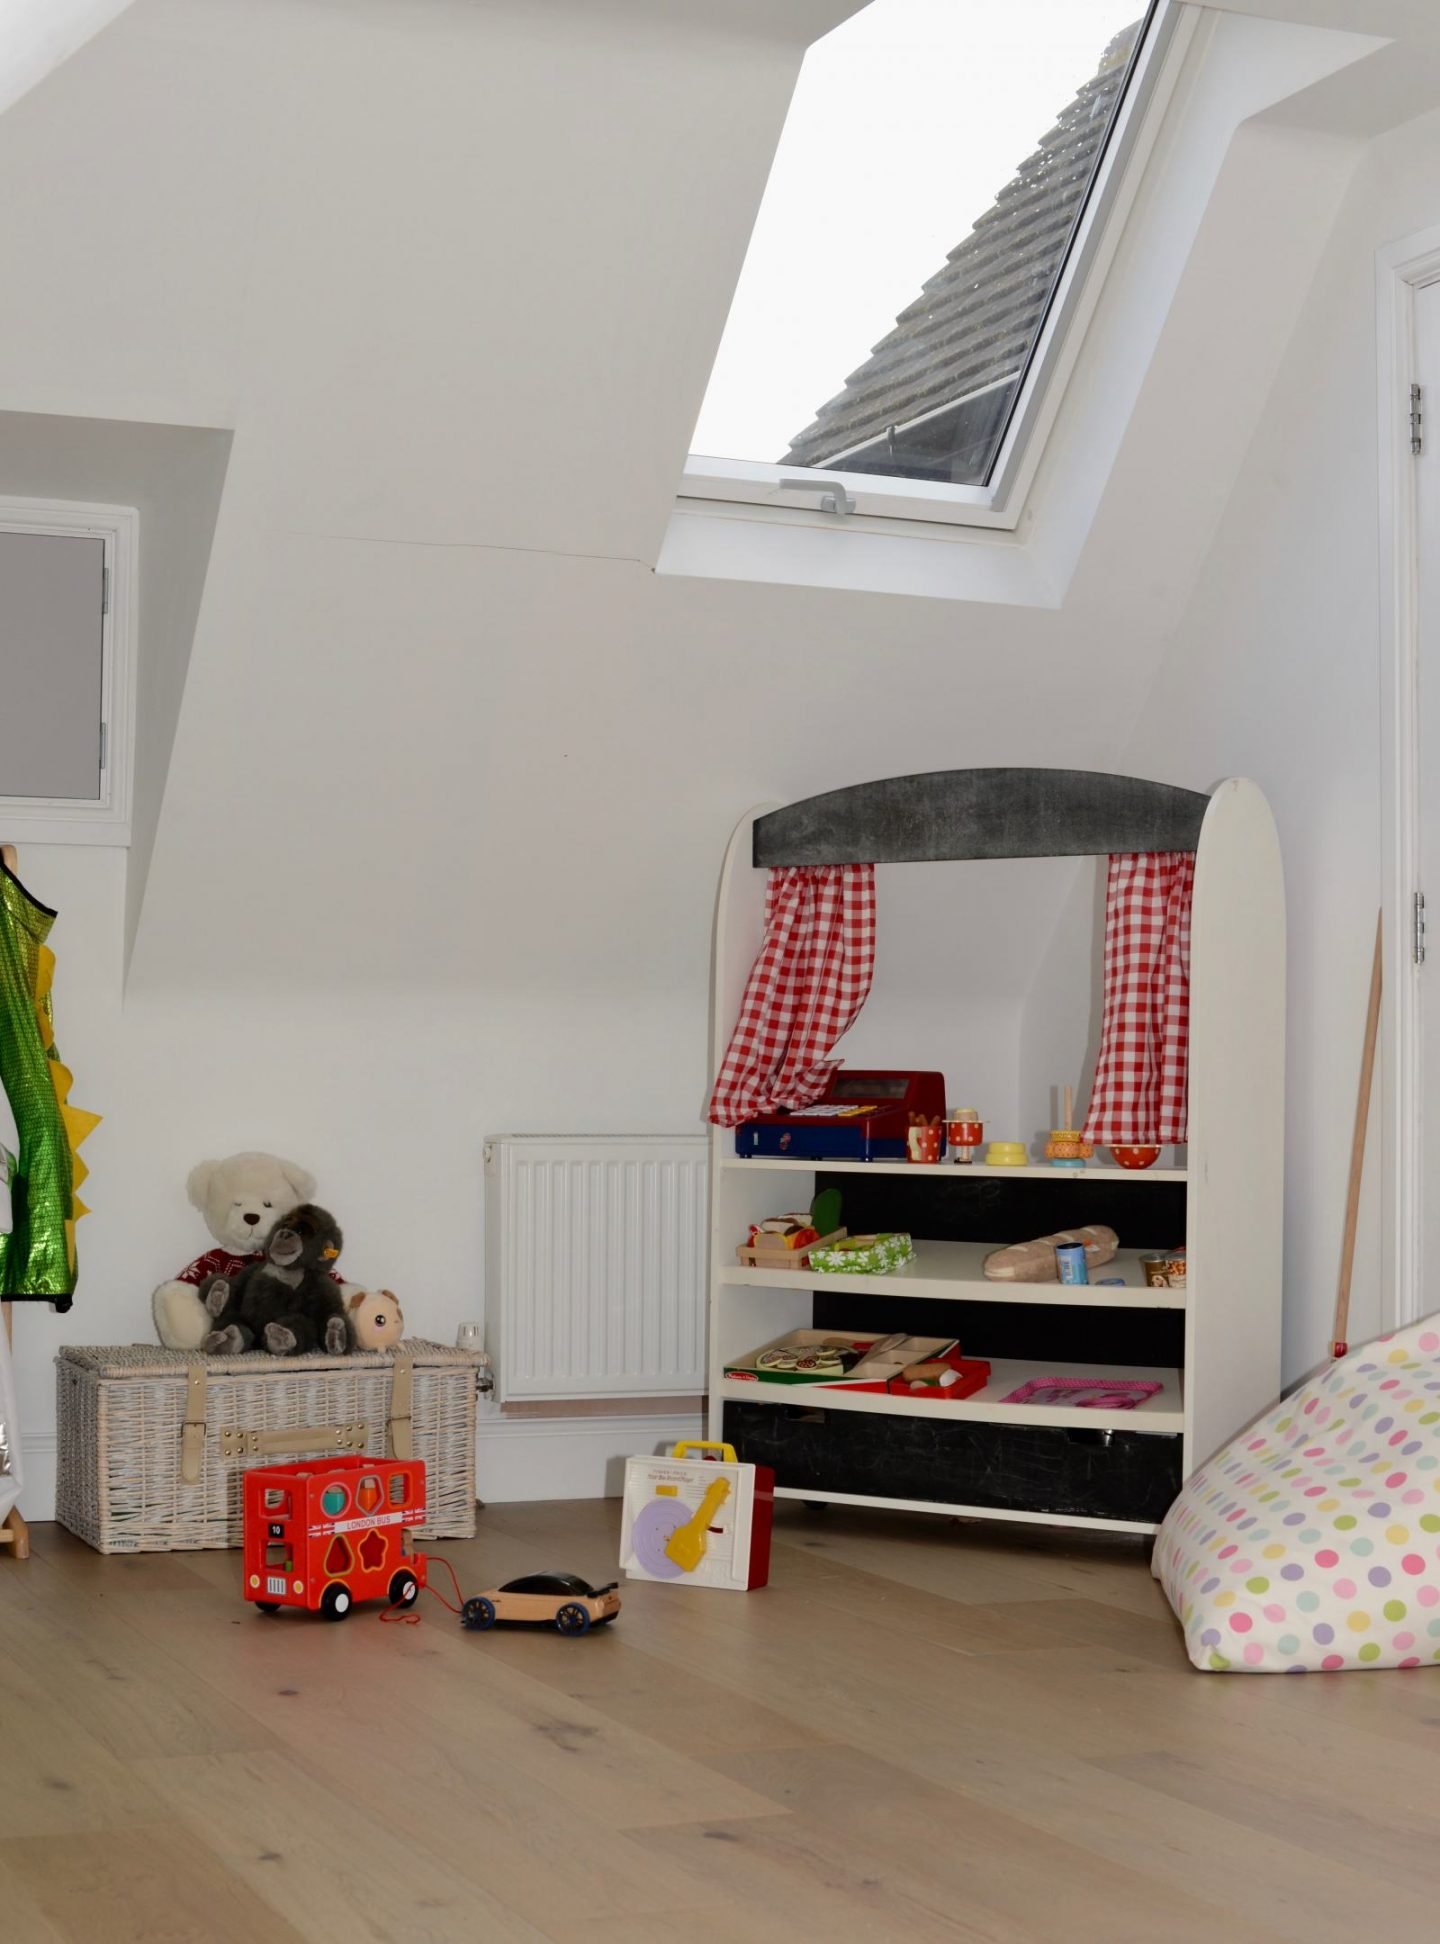 Creating extra light in a dark single story extraction with VELUX roof windows